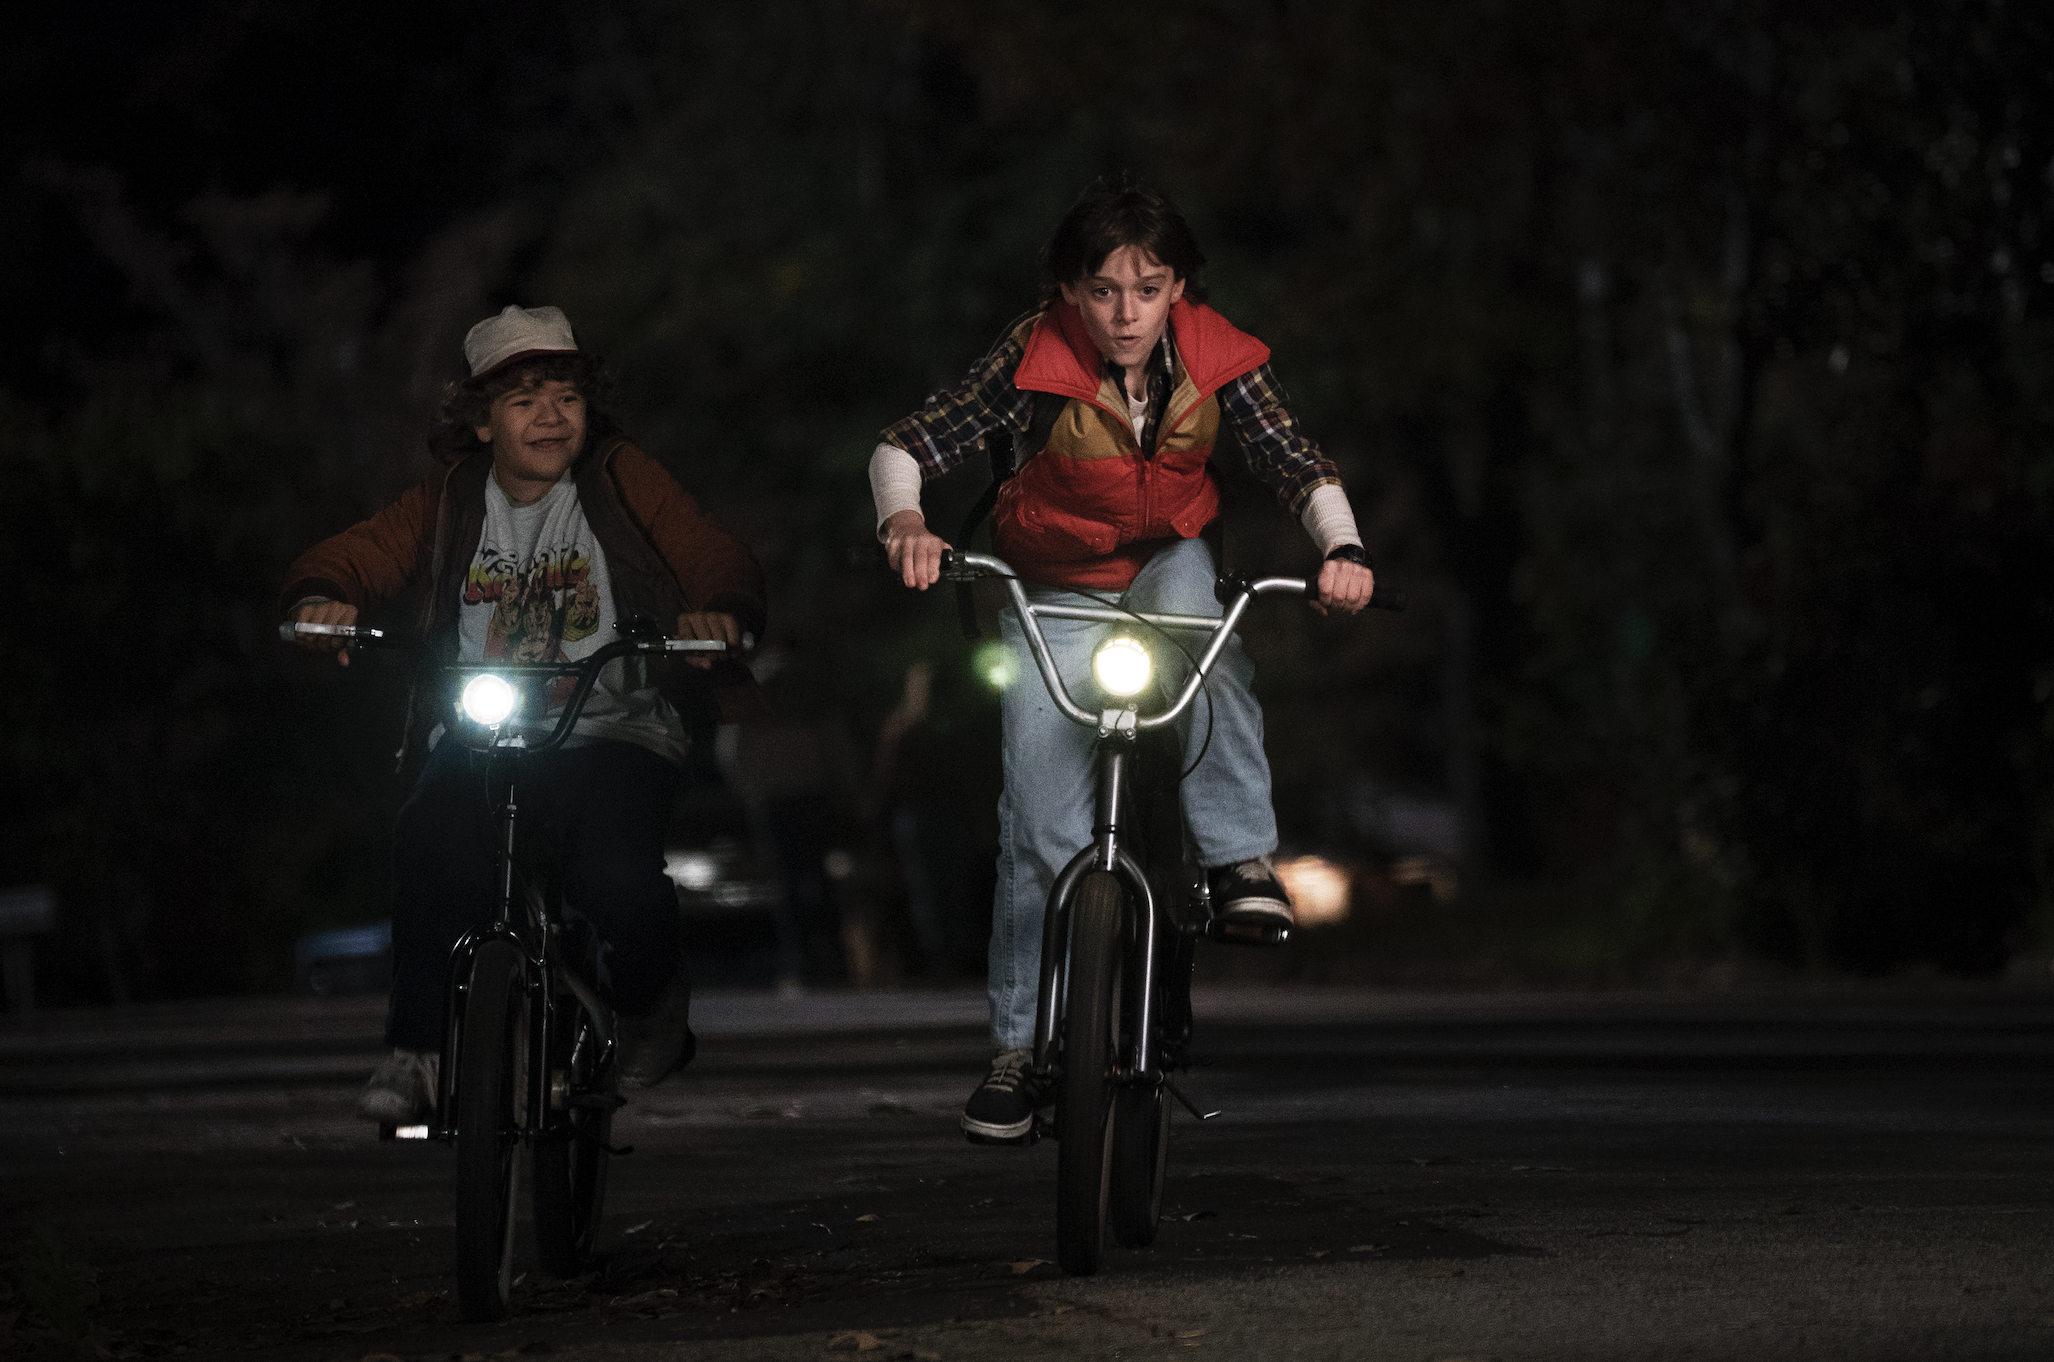 An episode still of two characters on their bikes